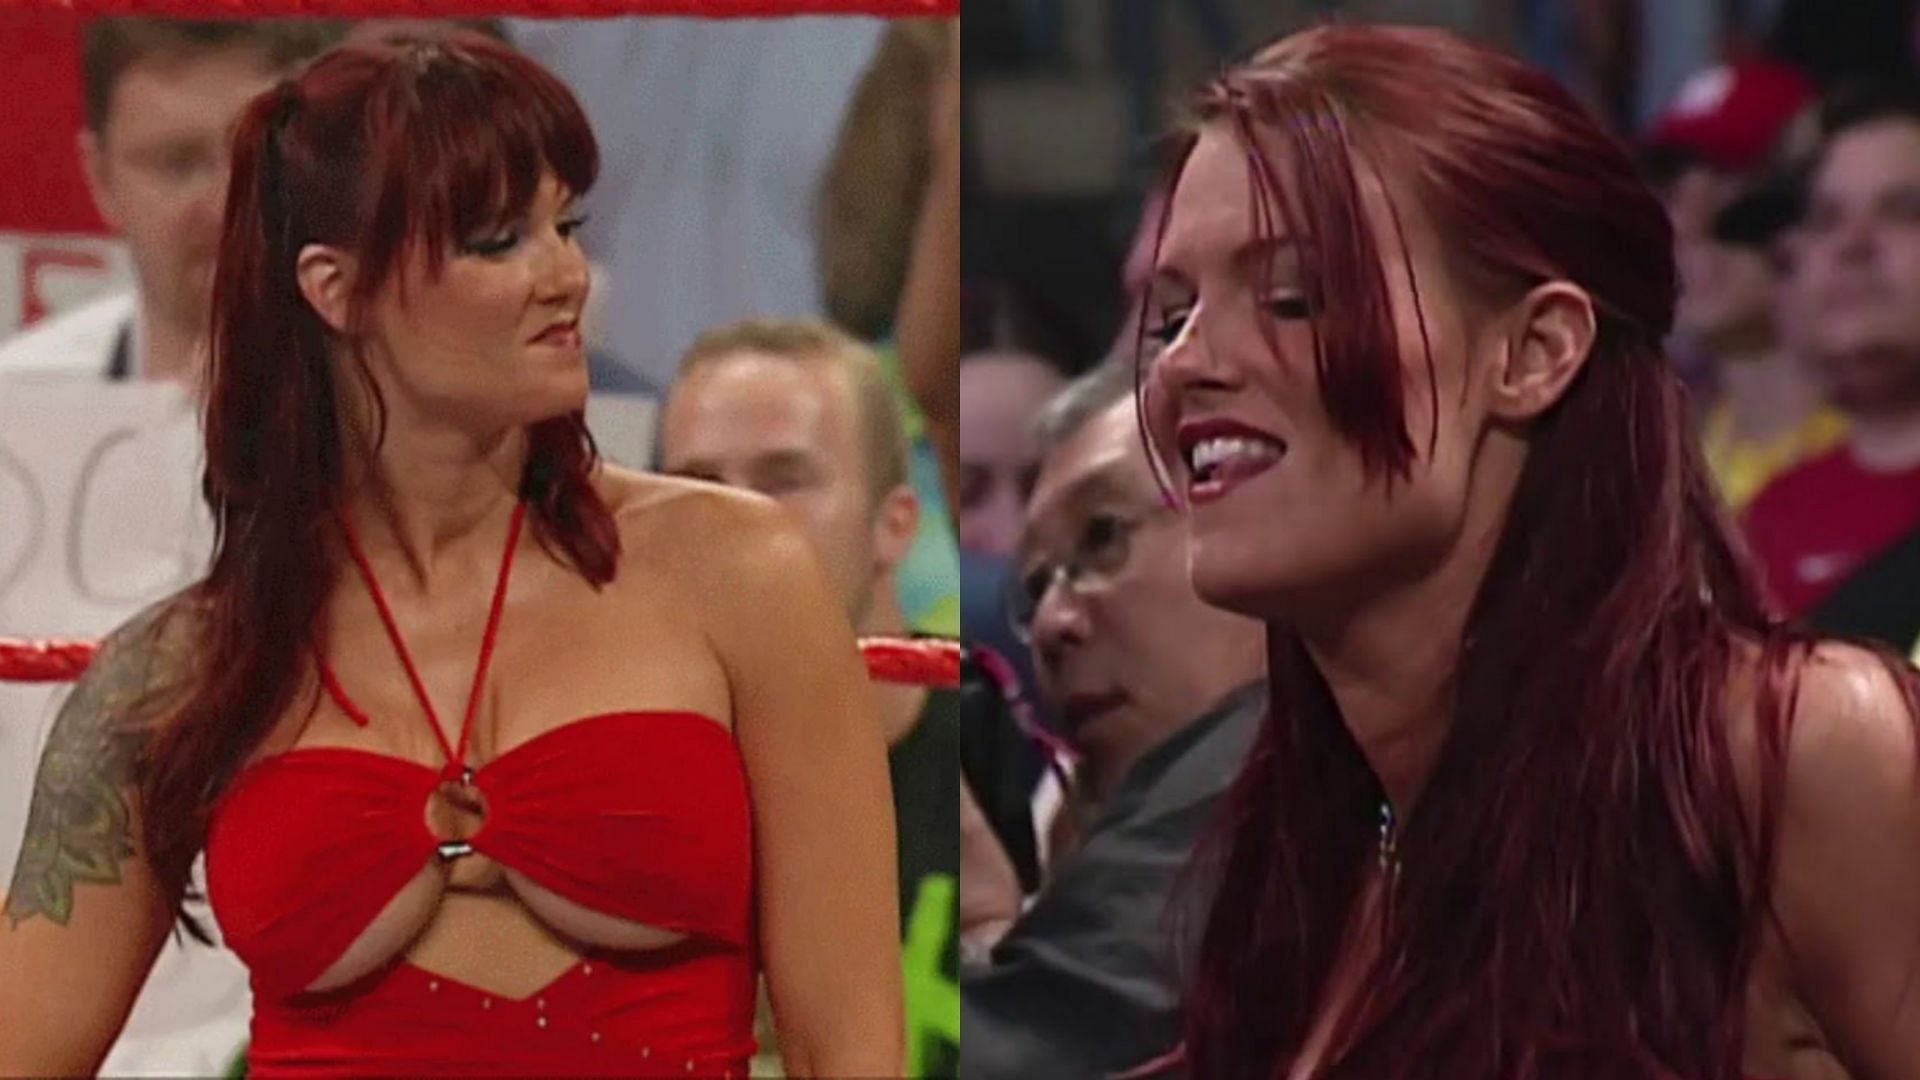 Oh man, we just saw Lita's boob! - When 4-time Women's Champion